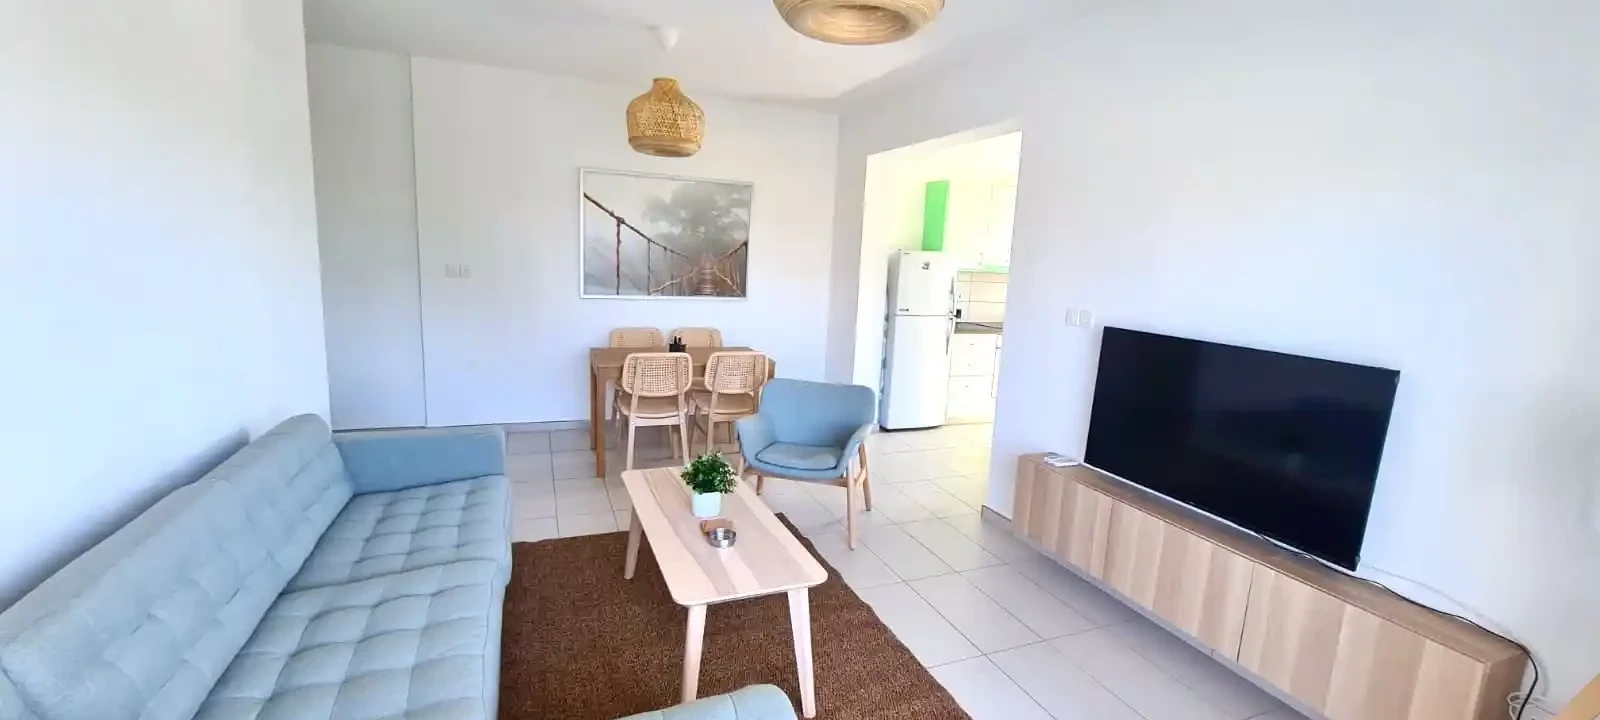 1-bedroom apartment to rent €1.100, image 1